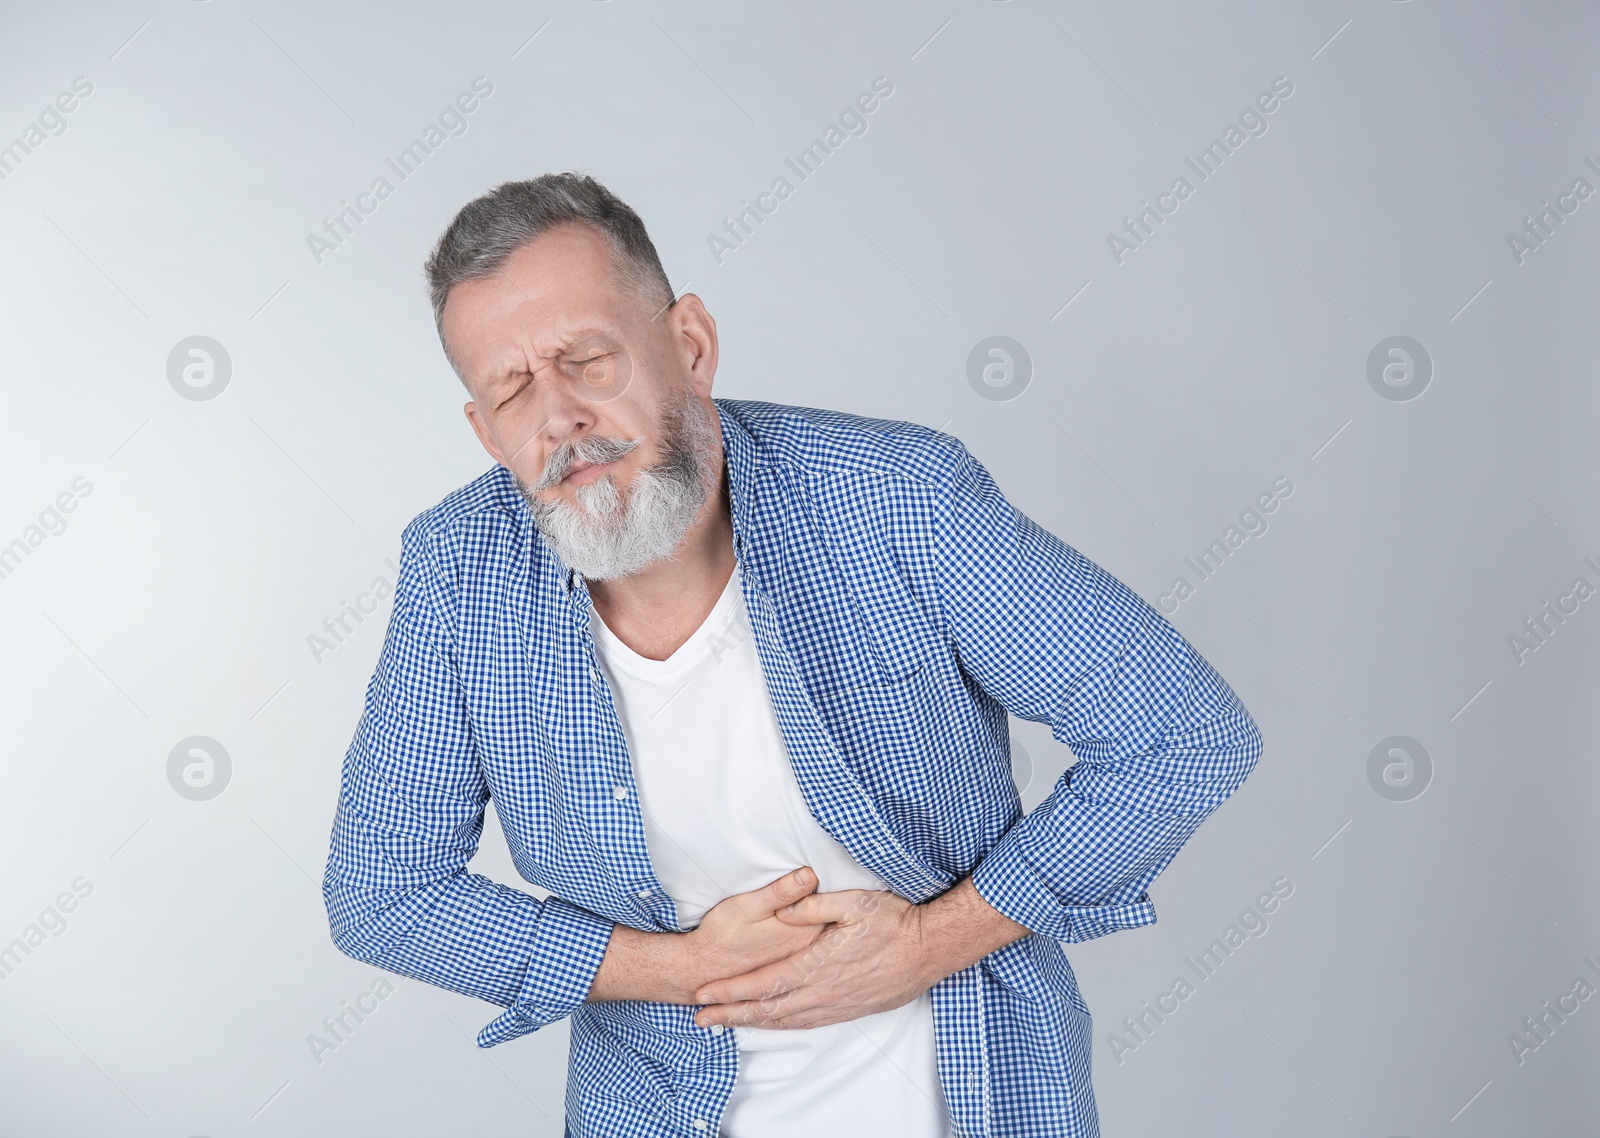 Photo of Man suffering from abdominal pain on light background